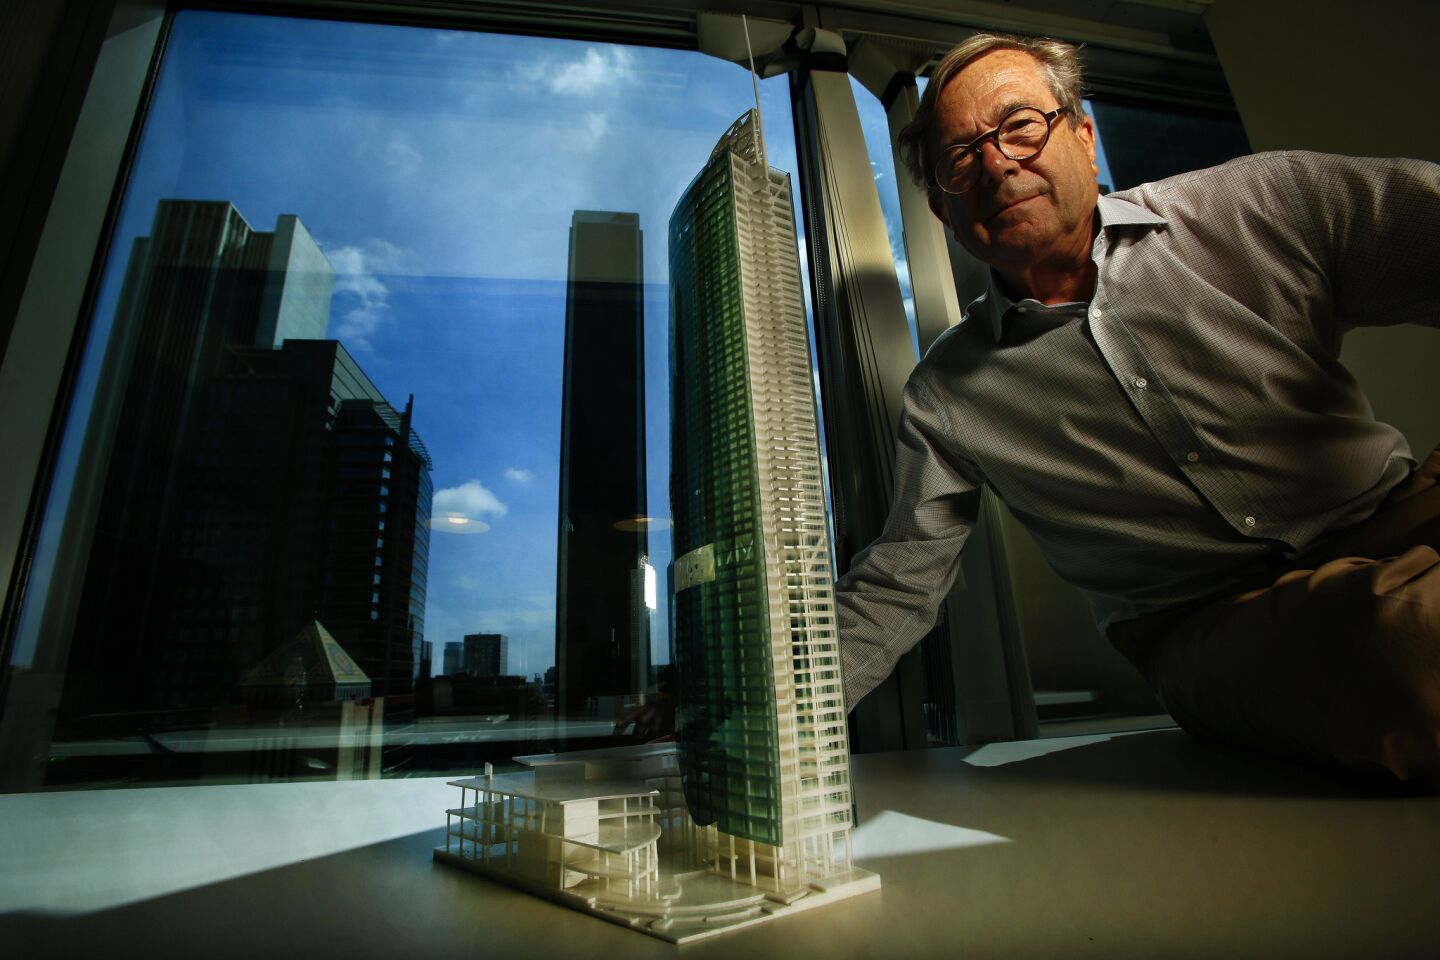 David Martin of A.C. Martin Partners, the firm responsible for the design of the Wilshire Grand tower, shows a model of the 73-story skyscraper.